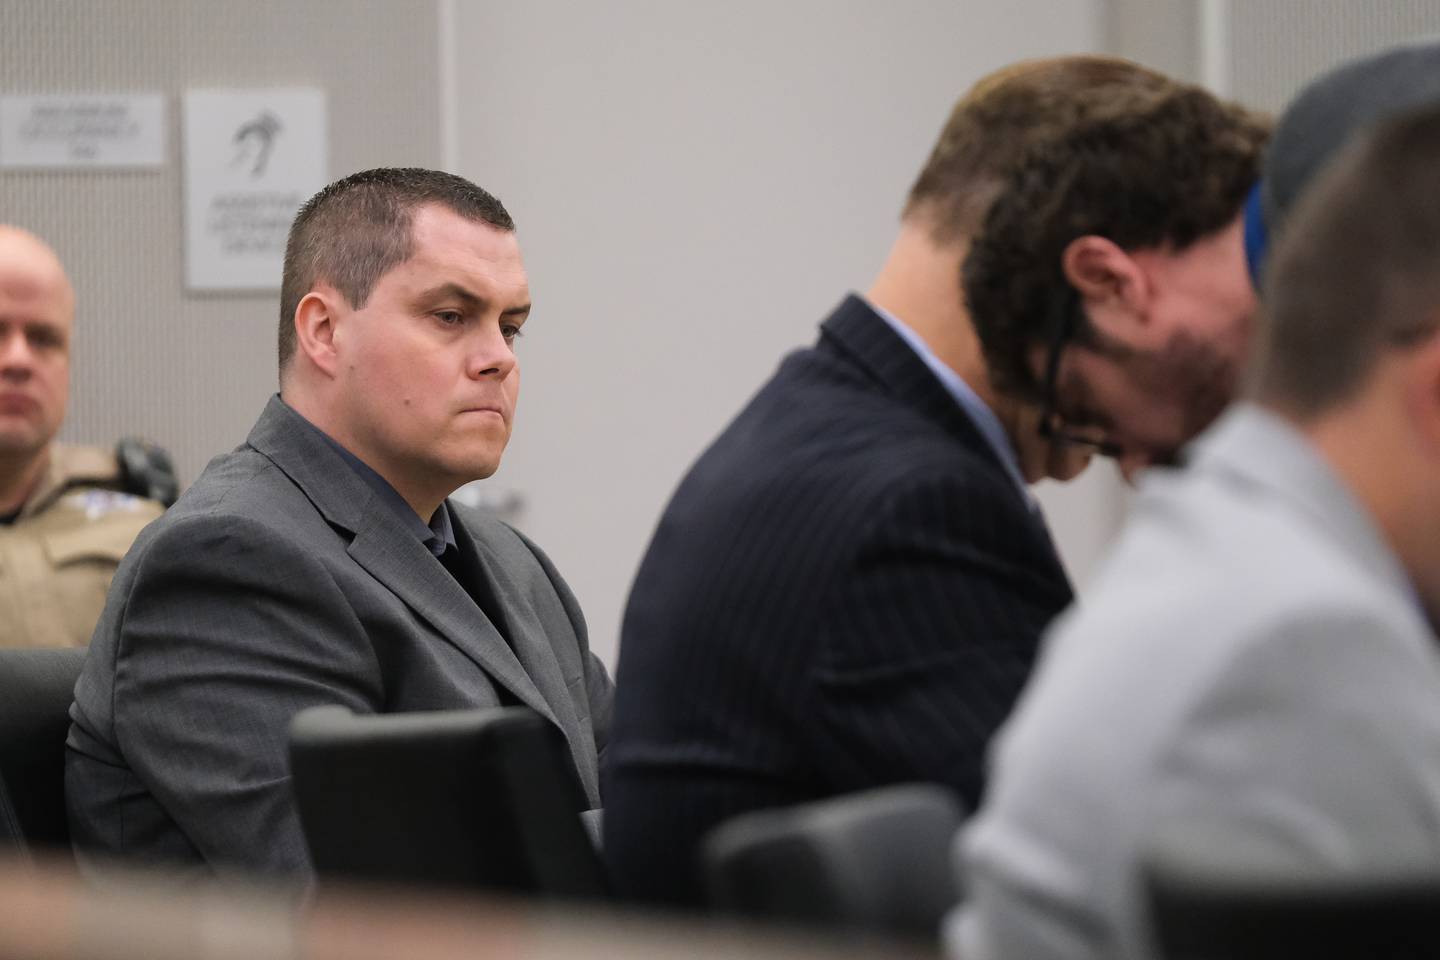 Jeremy Boshears, 36, watches as his lawyer Chuck Bretz converses with the prosecuting attorney Thomas Bahar. Boshears is charged with the murder of Kaitlyn “Katie” Kearns, 24, on Nov. 13, 2017. Monday, April 25, 2022, in Joliet.